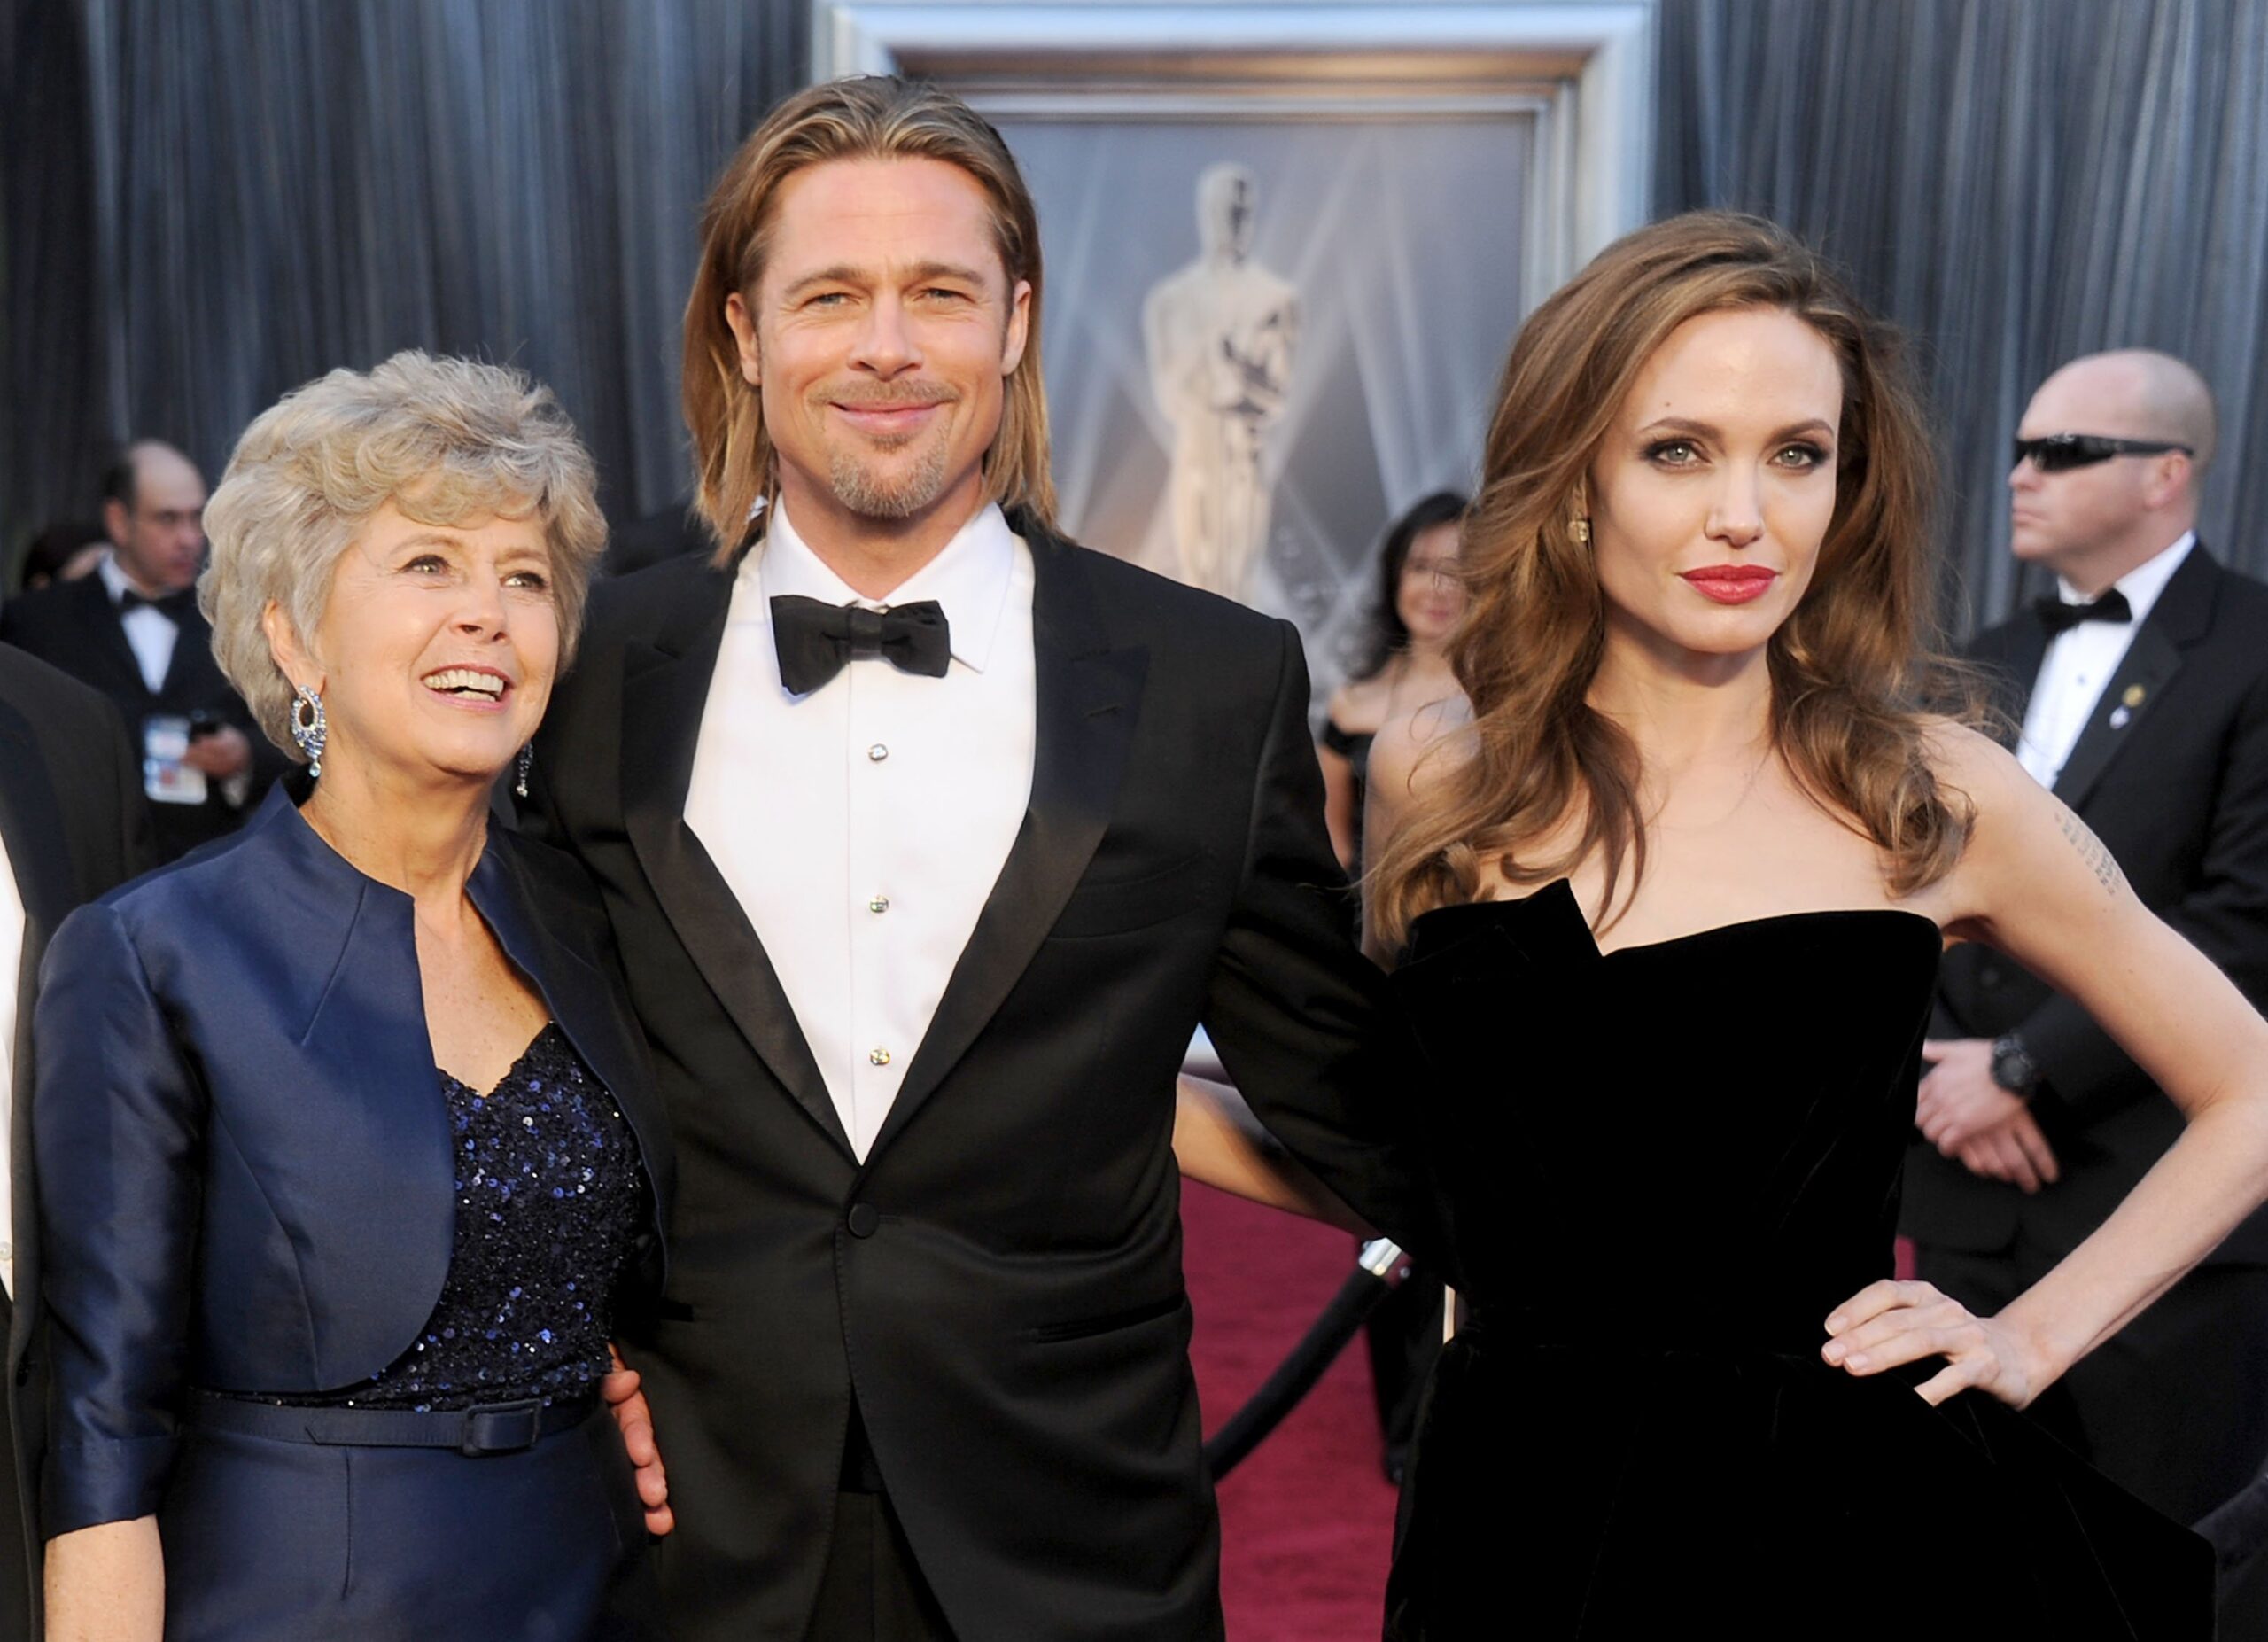 Jane Pitt, Brad Pitt and Angelina Jolie arrive at the 84th Annual Academy Awards at Hollywood & Highland Center on February 26, 2012, in Hollywood, California. | Source: Getty Images